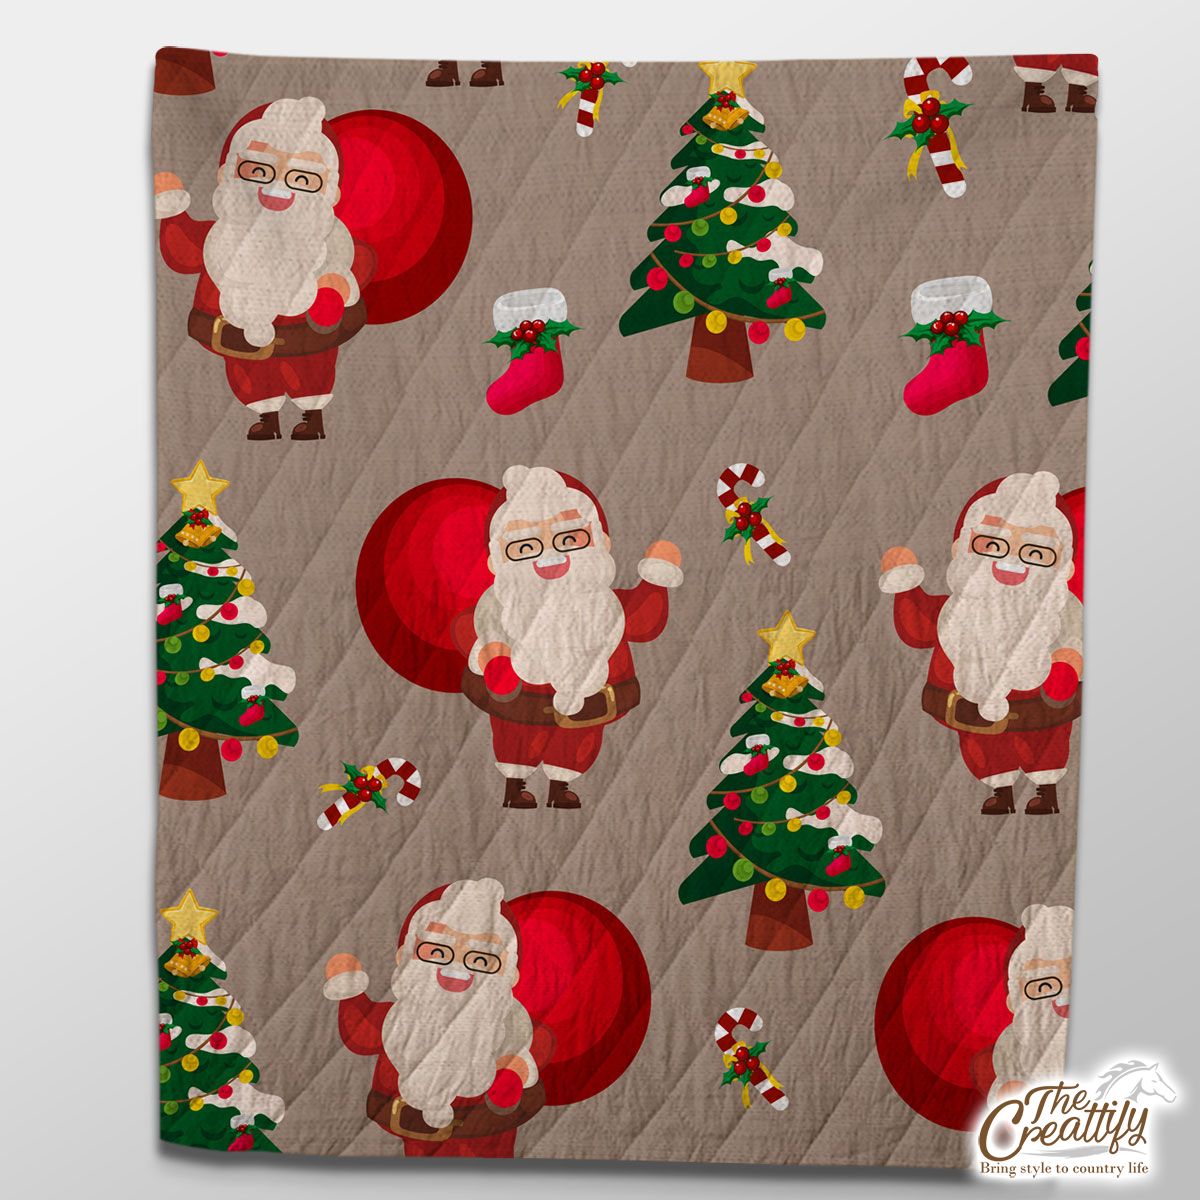 Santa Clause, Chritmas Tree, Candy Cane On Brown Background Quilt